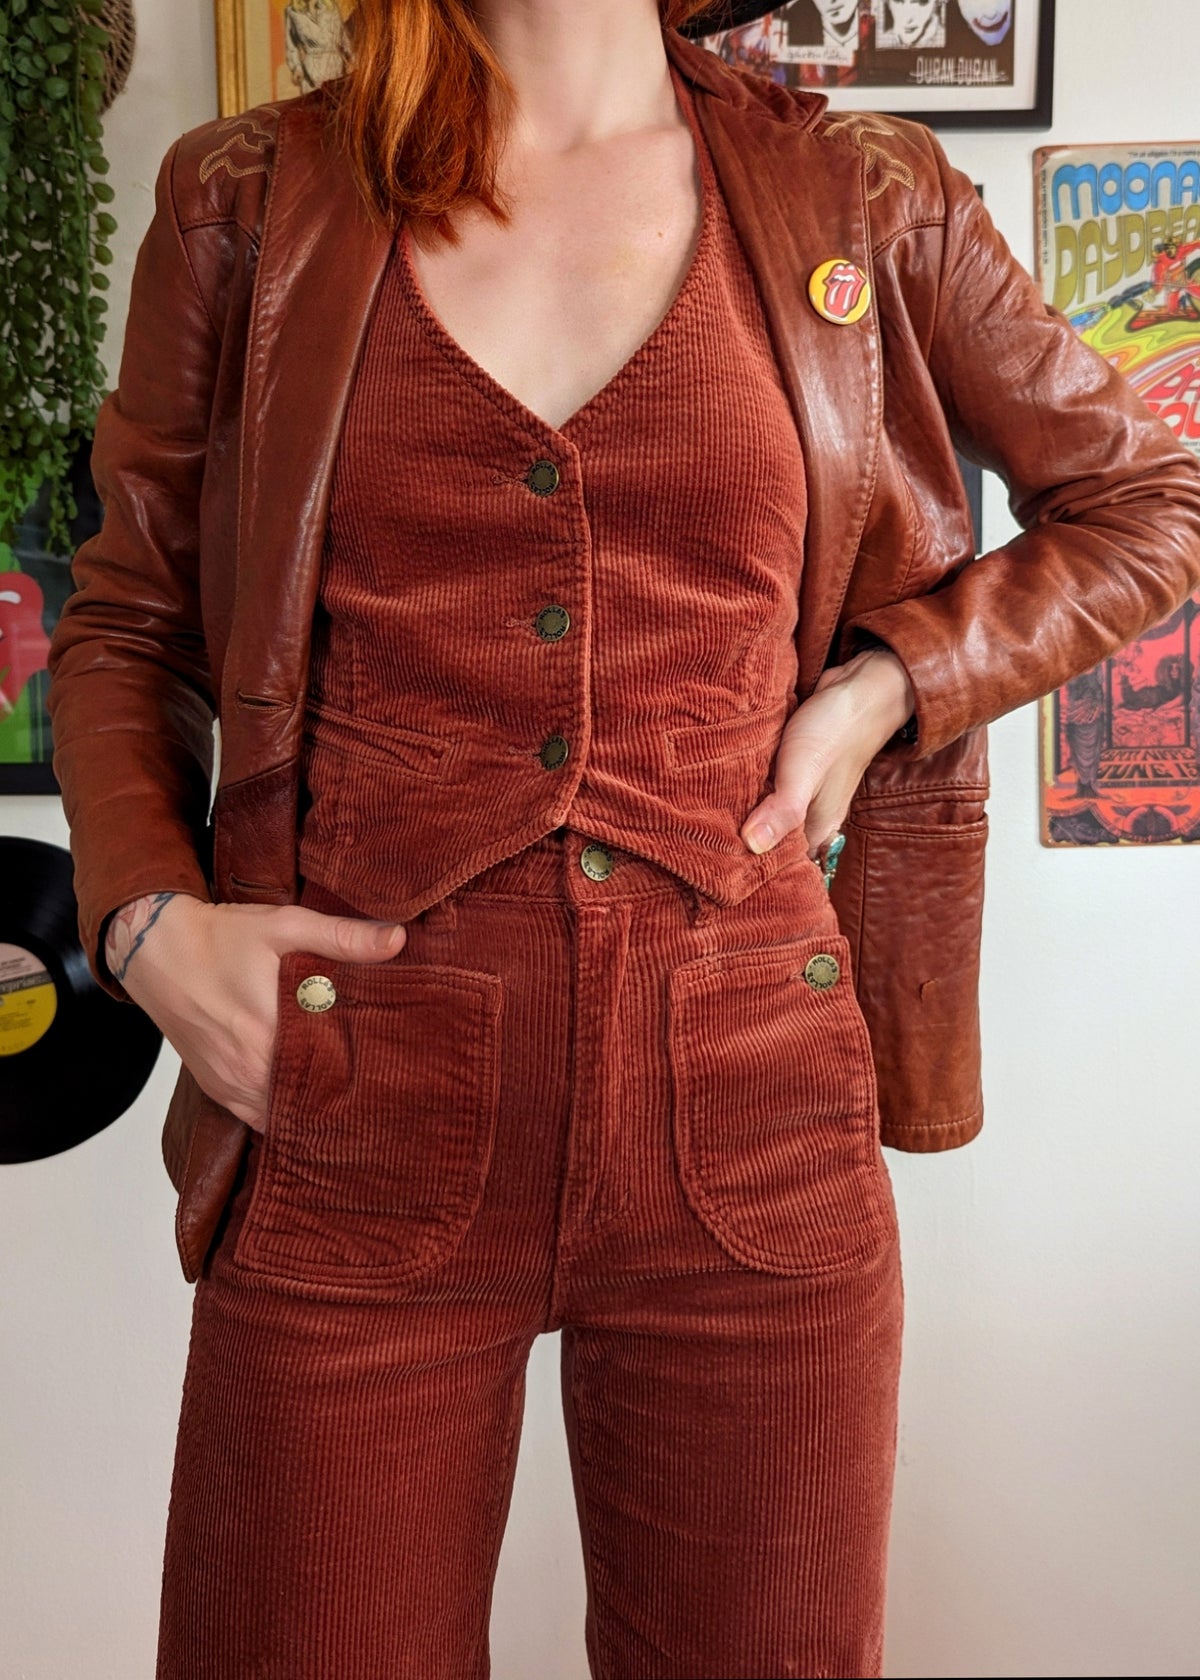 70s inspired brick red stretch corduroy halter vest by Rolla's Jeans